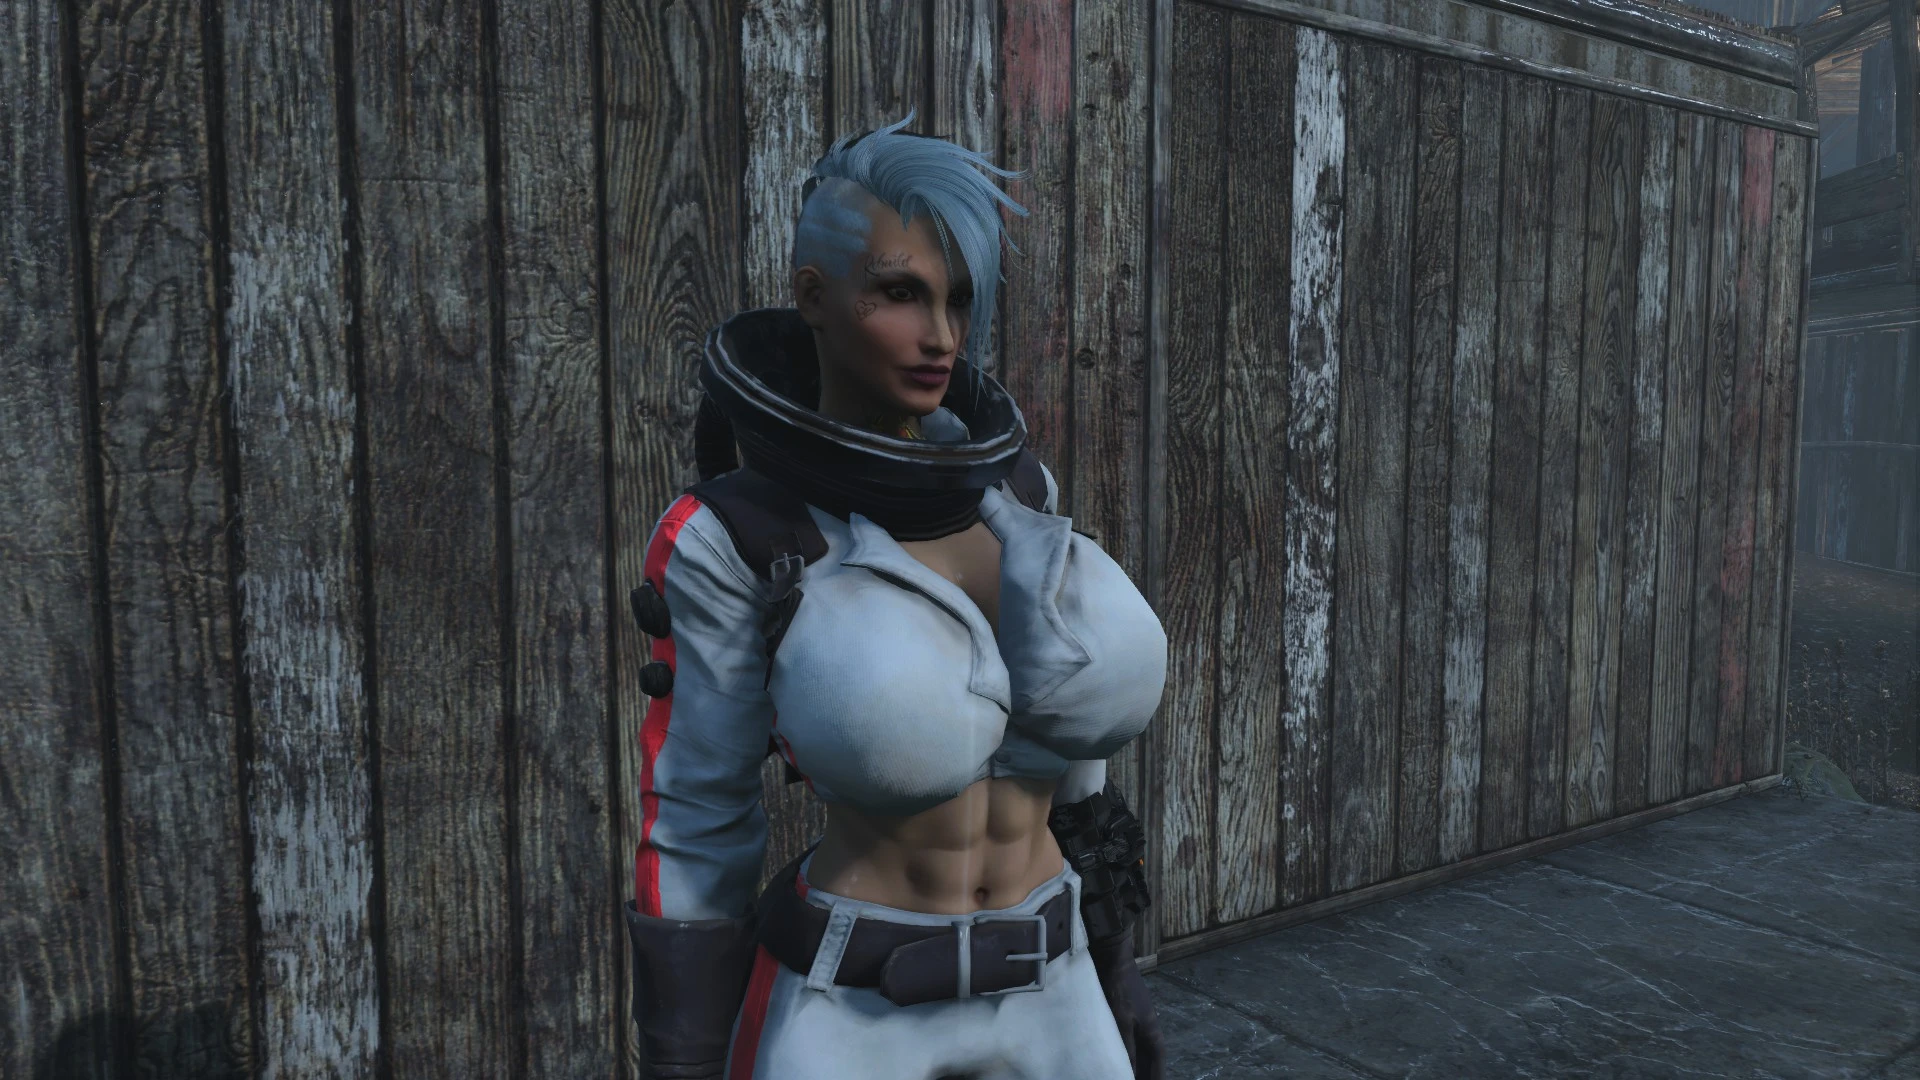 Nuka Girl Rocketsuit For Atomic Beauty At Fallout 4 Nexus Mods And Community